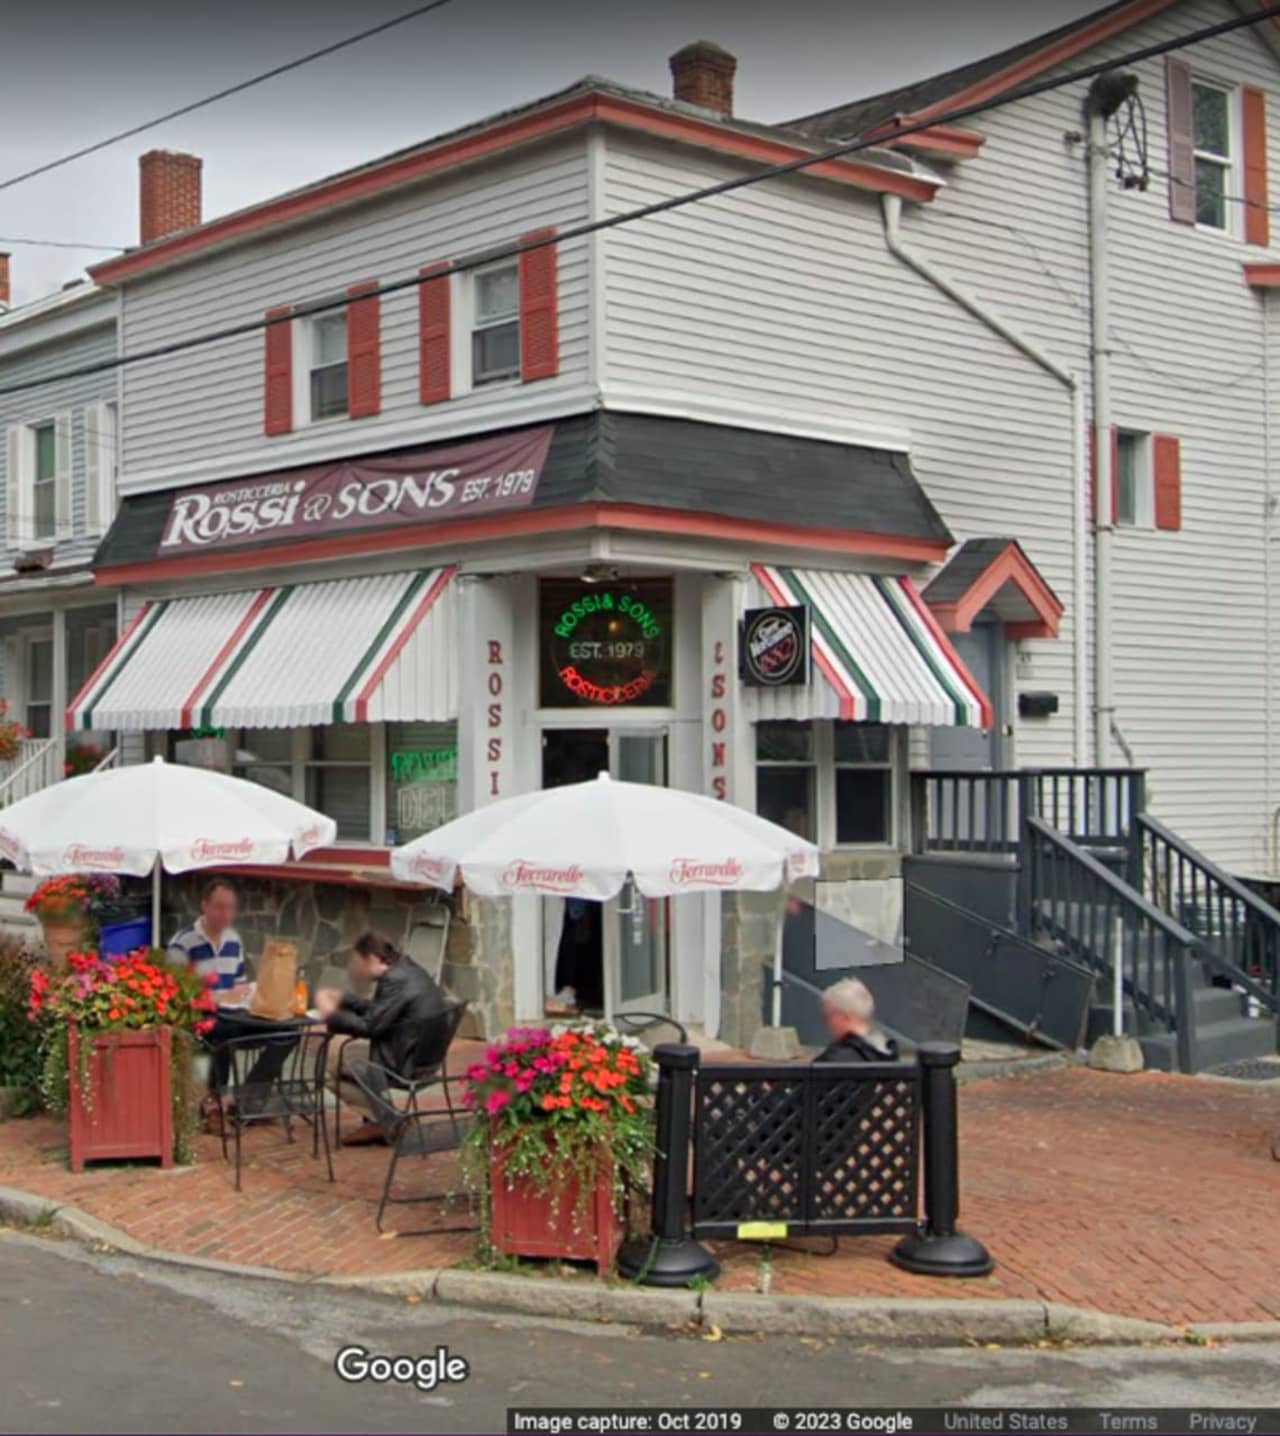 Rossi & Sons Deli, located at 45 S. Clover St., in Poughkeepsie.